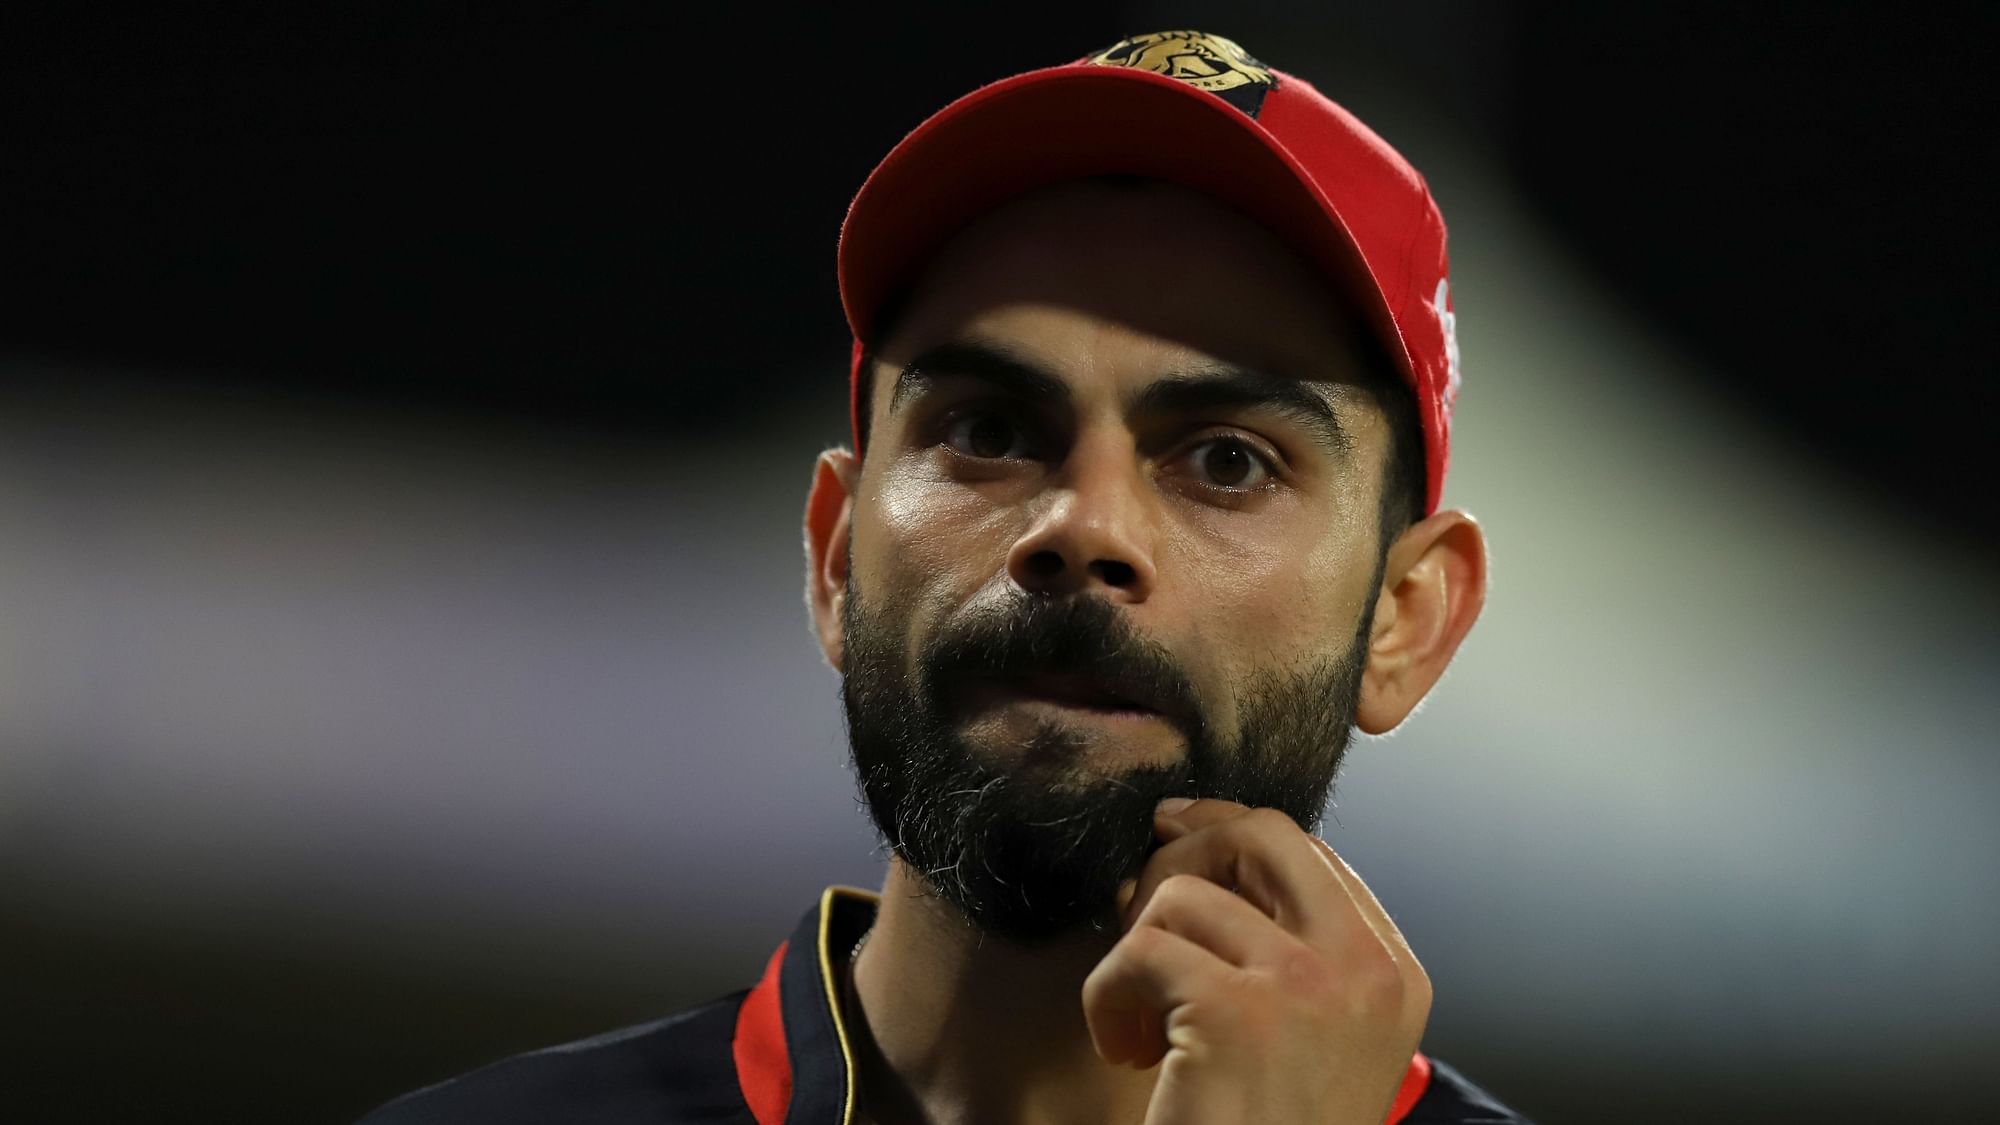 RCB director of cricket operations Mike Hesson has confirmed Virat Kohli will open in IPL 2021.